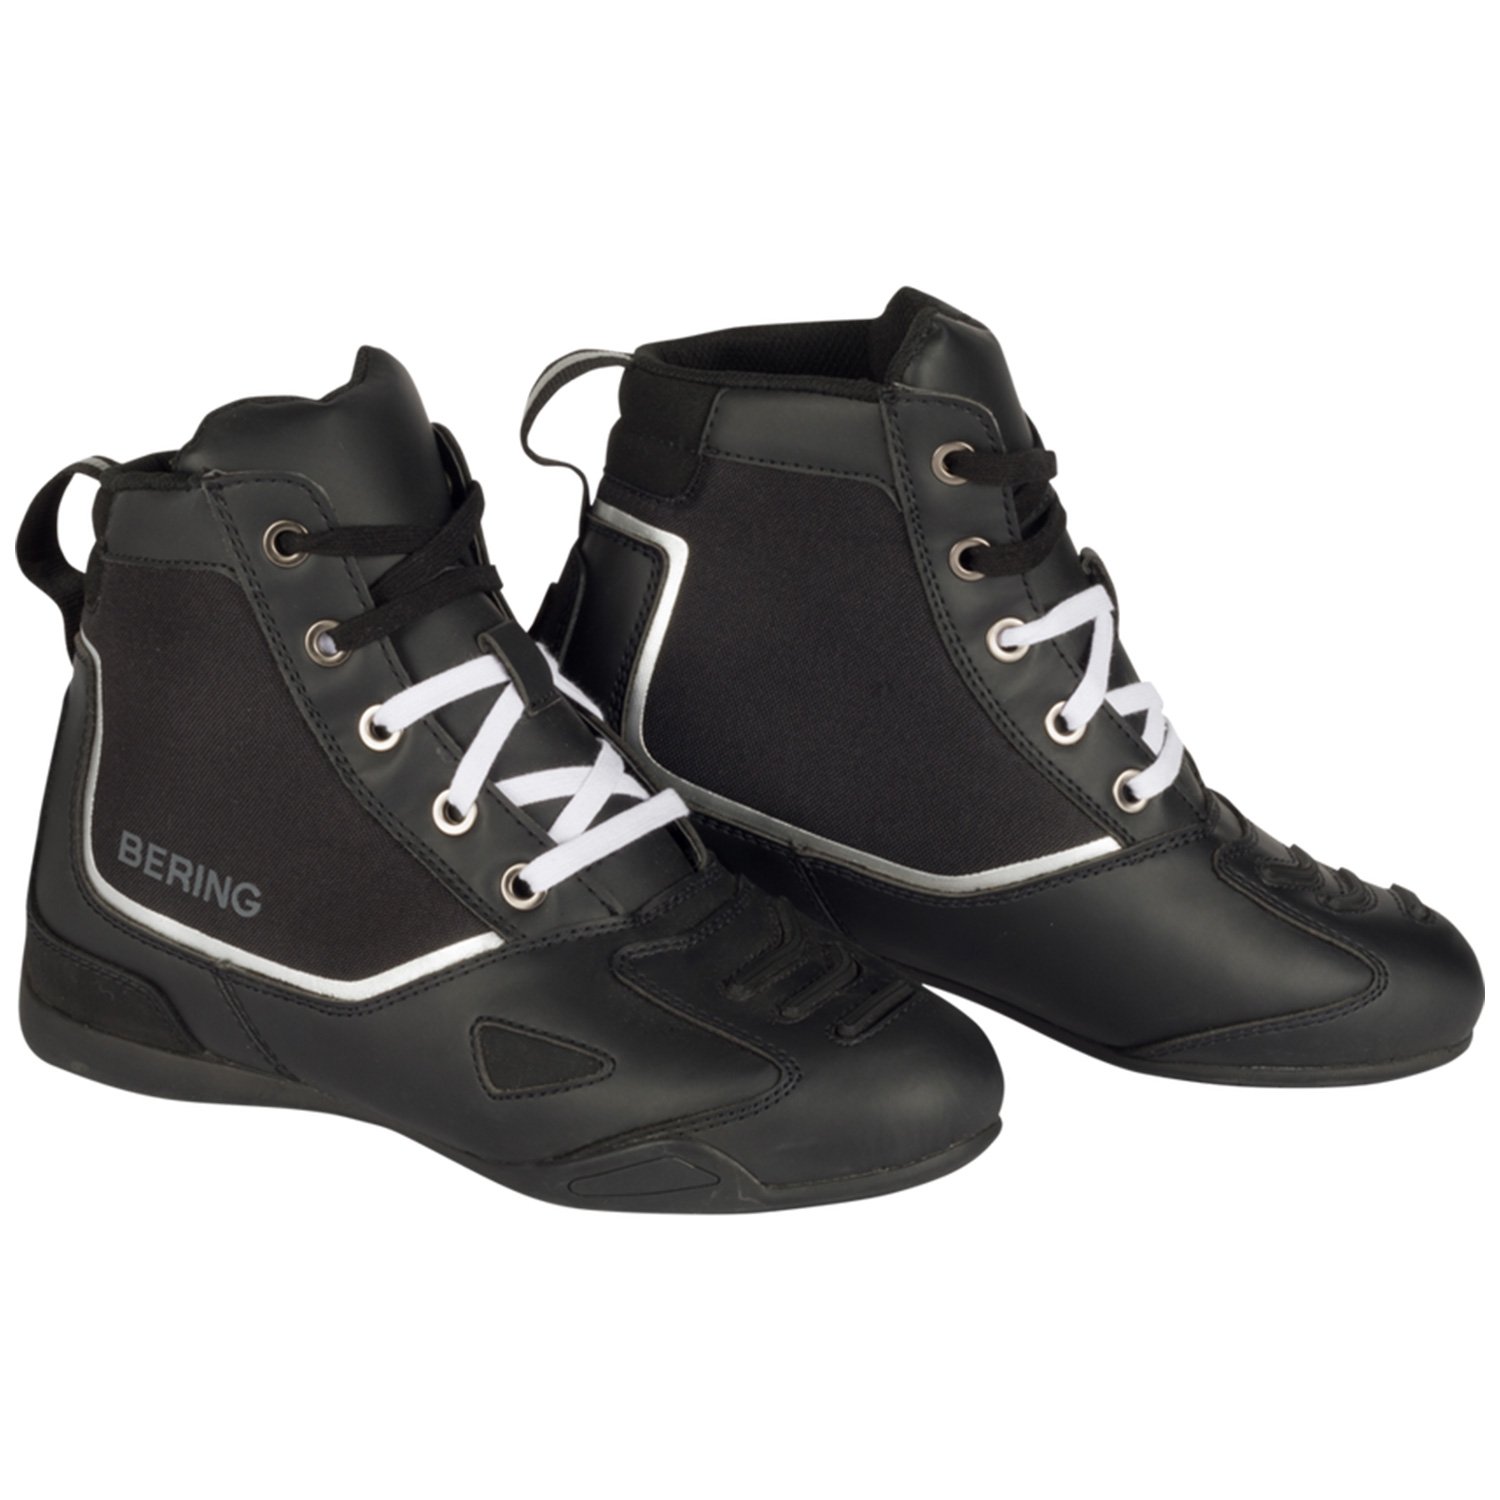 Image of Bering Active Shoes Black Size 43 ID 3660815184233